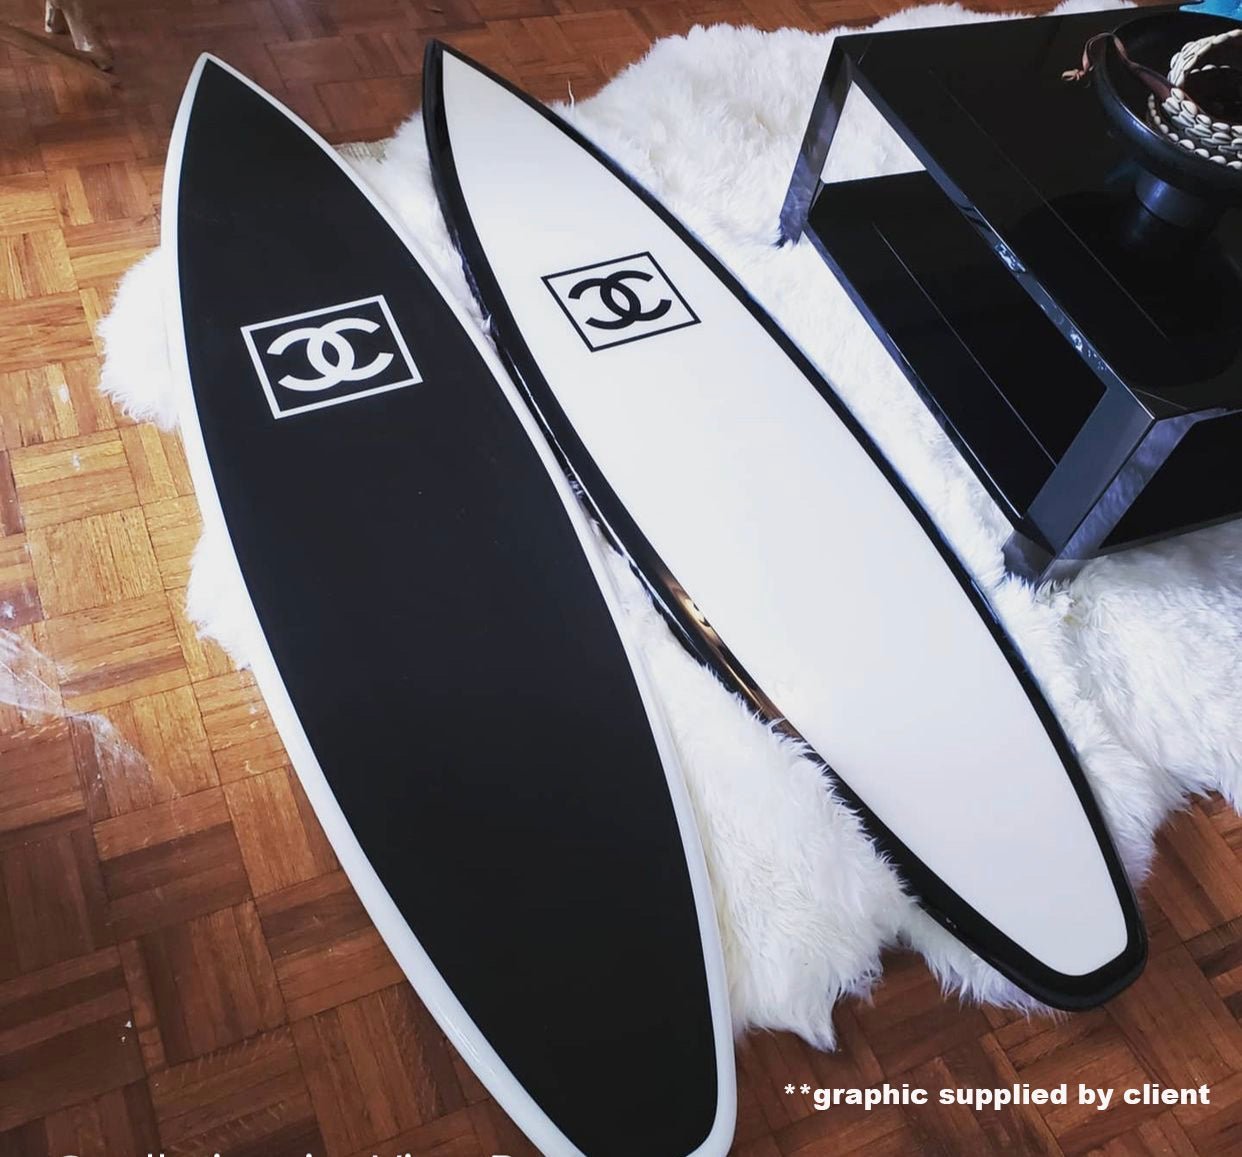 Chanel fashion house releases luxury surfboards